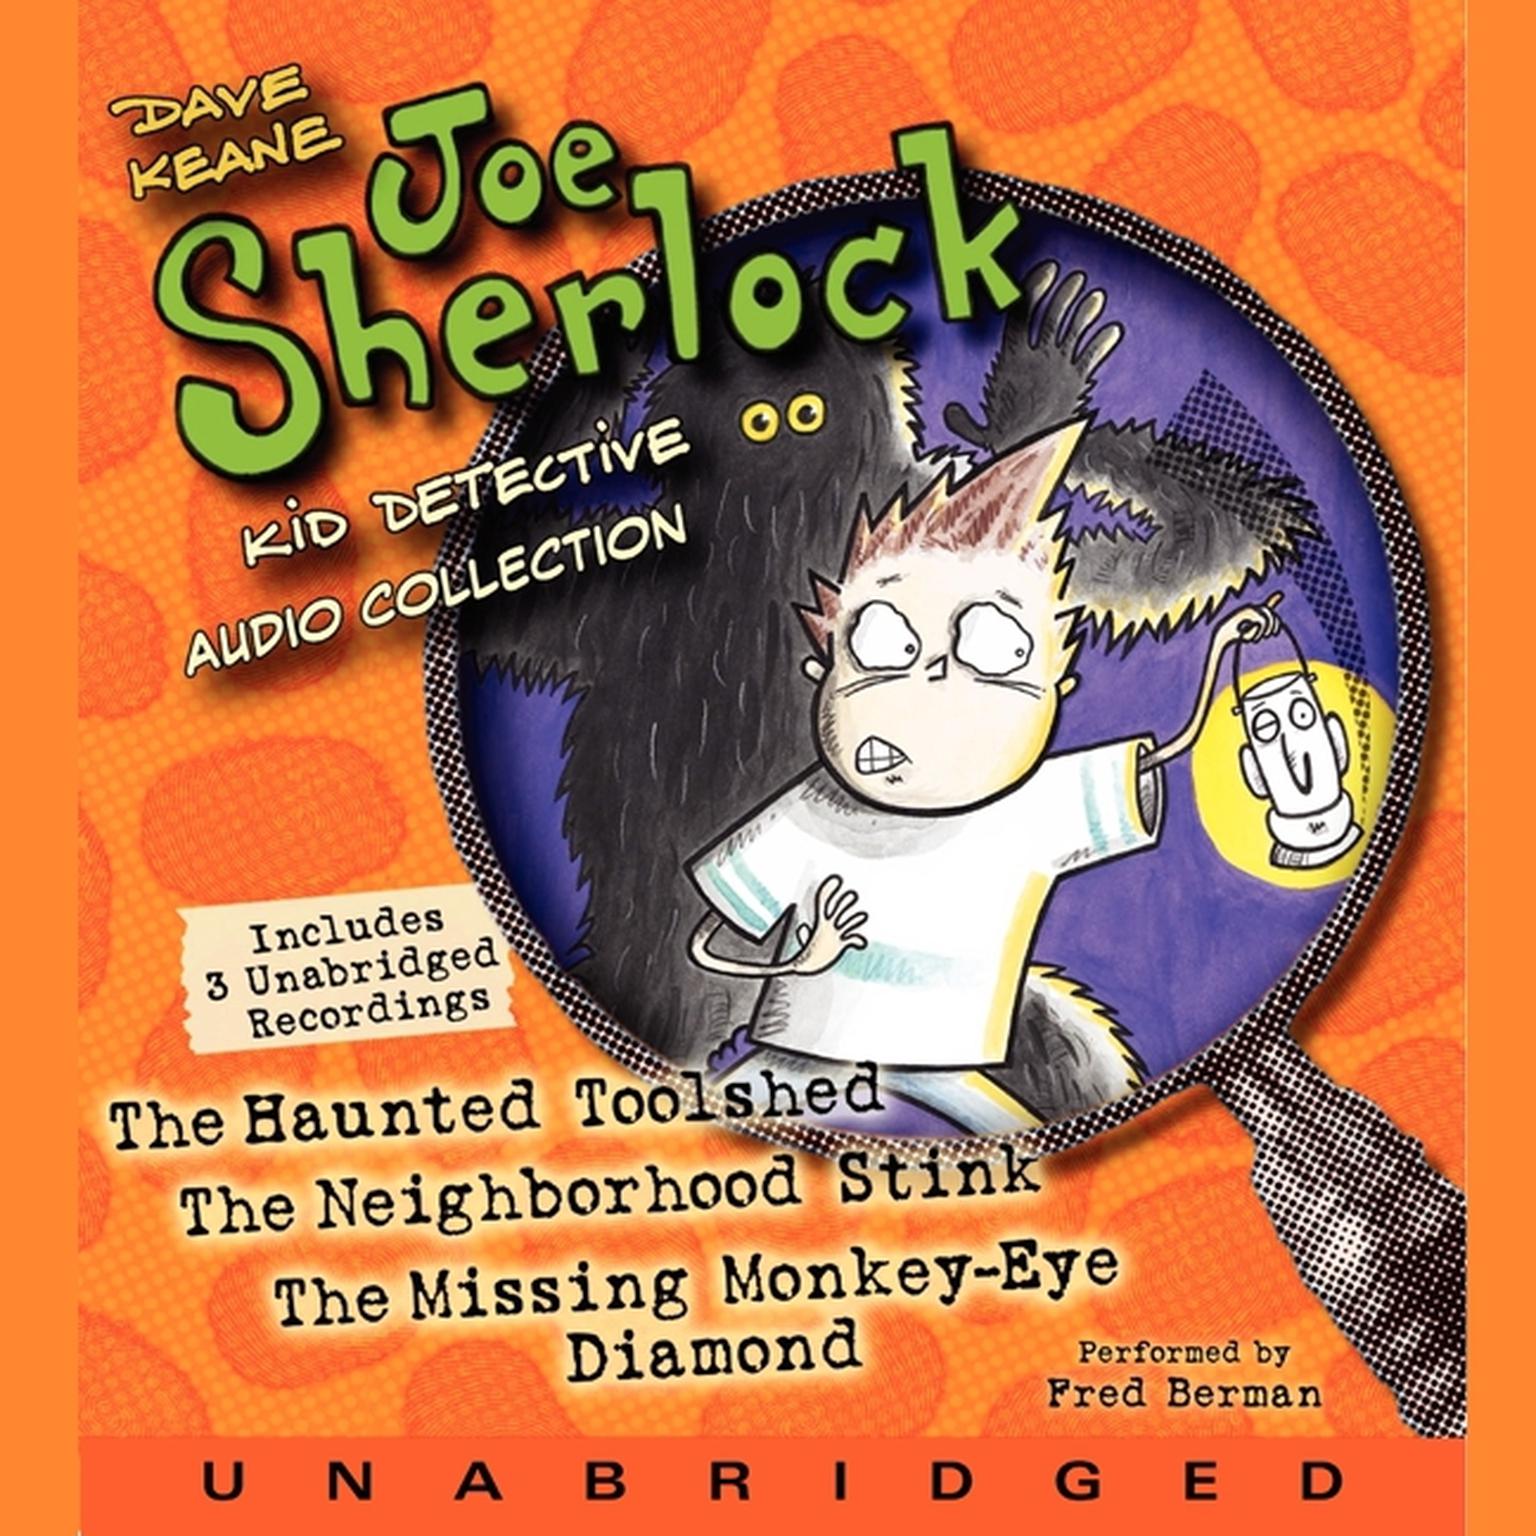 Joe Sherlock, Kid Detective Audio Collection: Case 000001:The Haunted Toolshed,Case 000002:The Neighborhood Stink,Case 000003:The Missing Monkey-Eye Diamond Audiobook, by Dave Keane